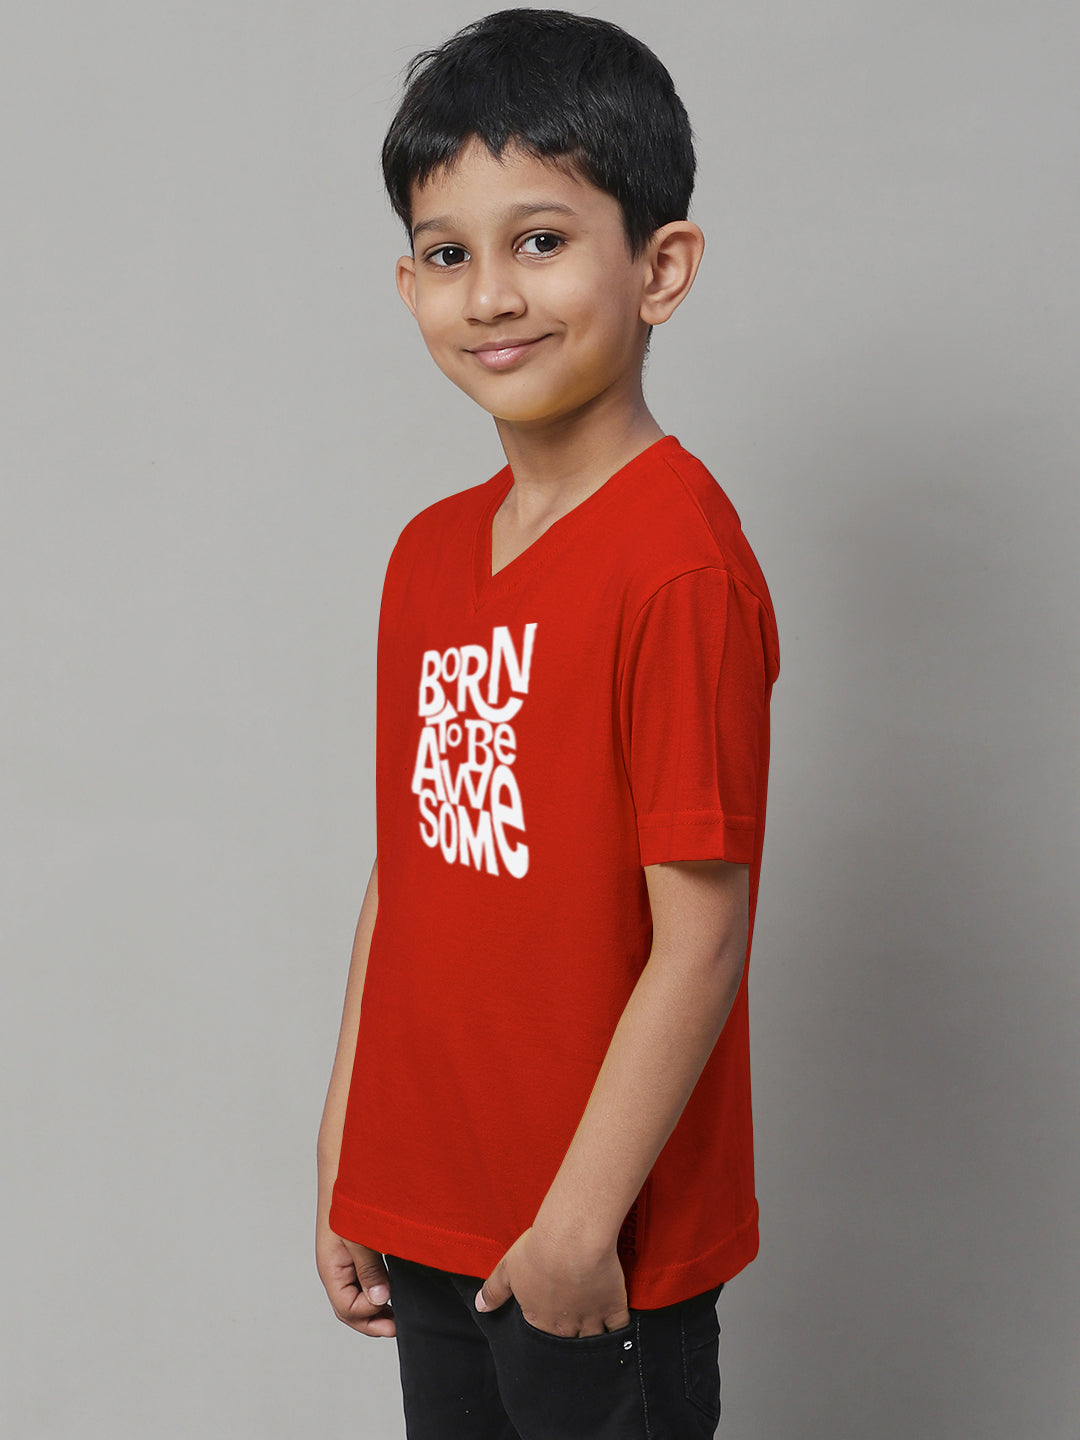 Boys Born To Be Awesome Half Sleeves Printed T-Shirt - Friskers